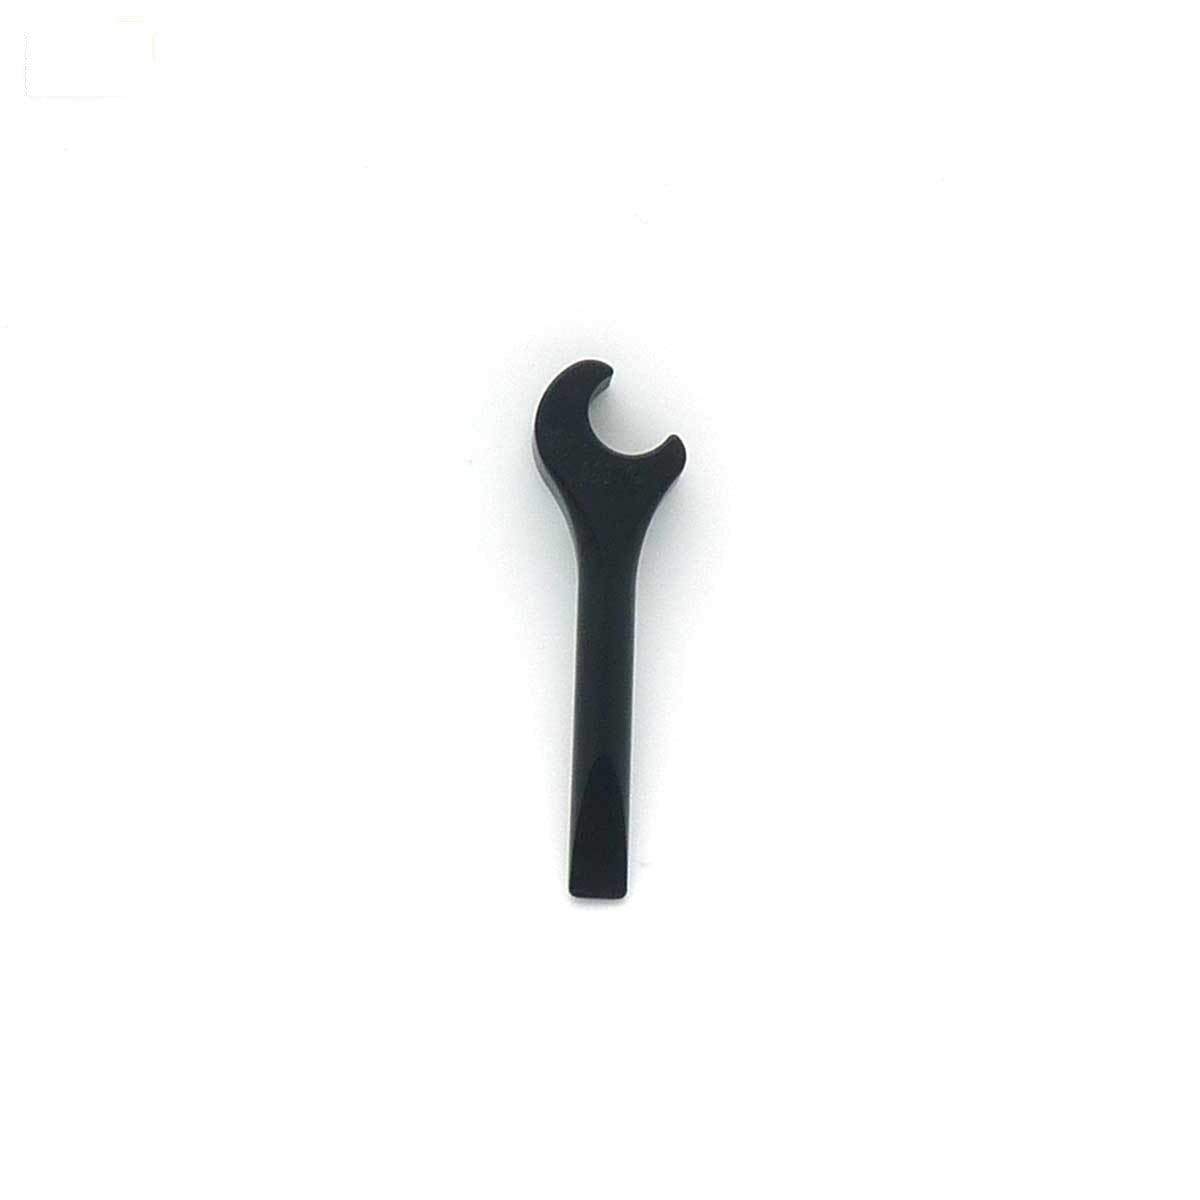 lego wrench spanner